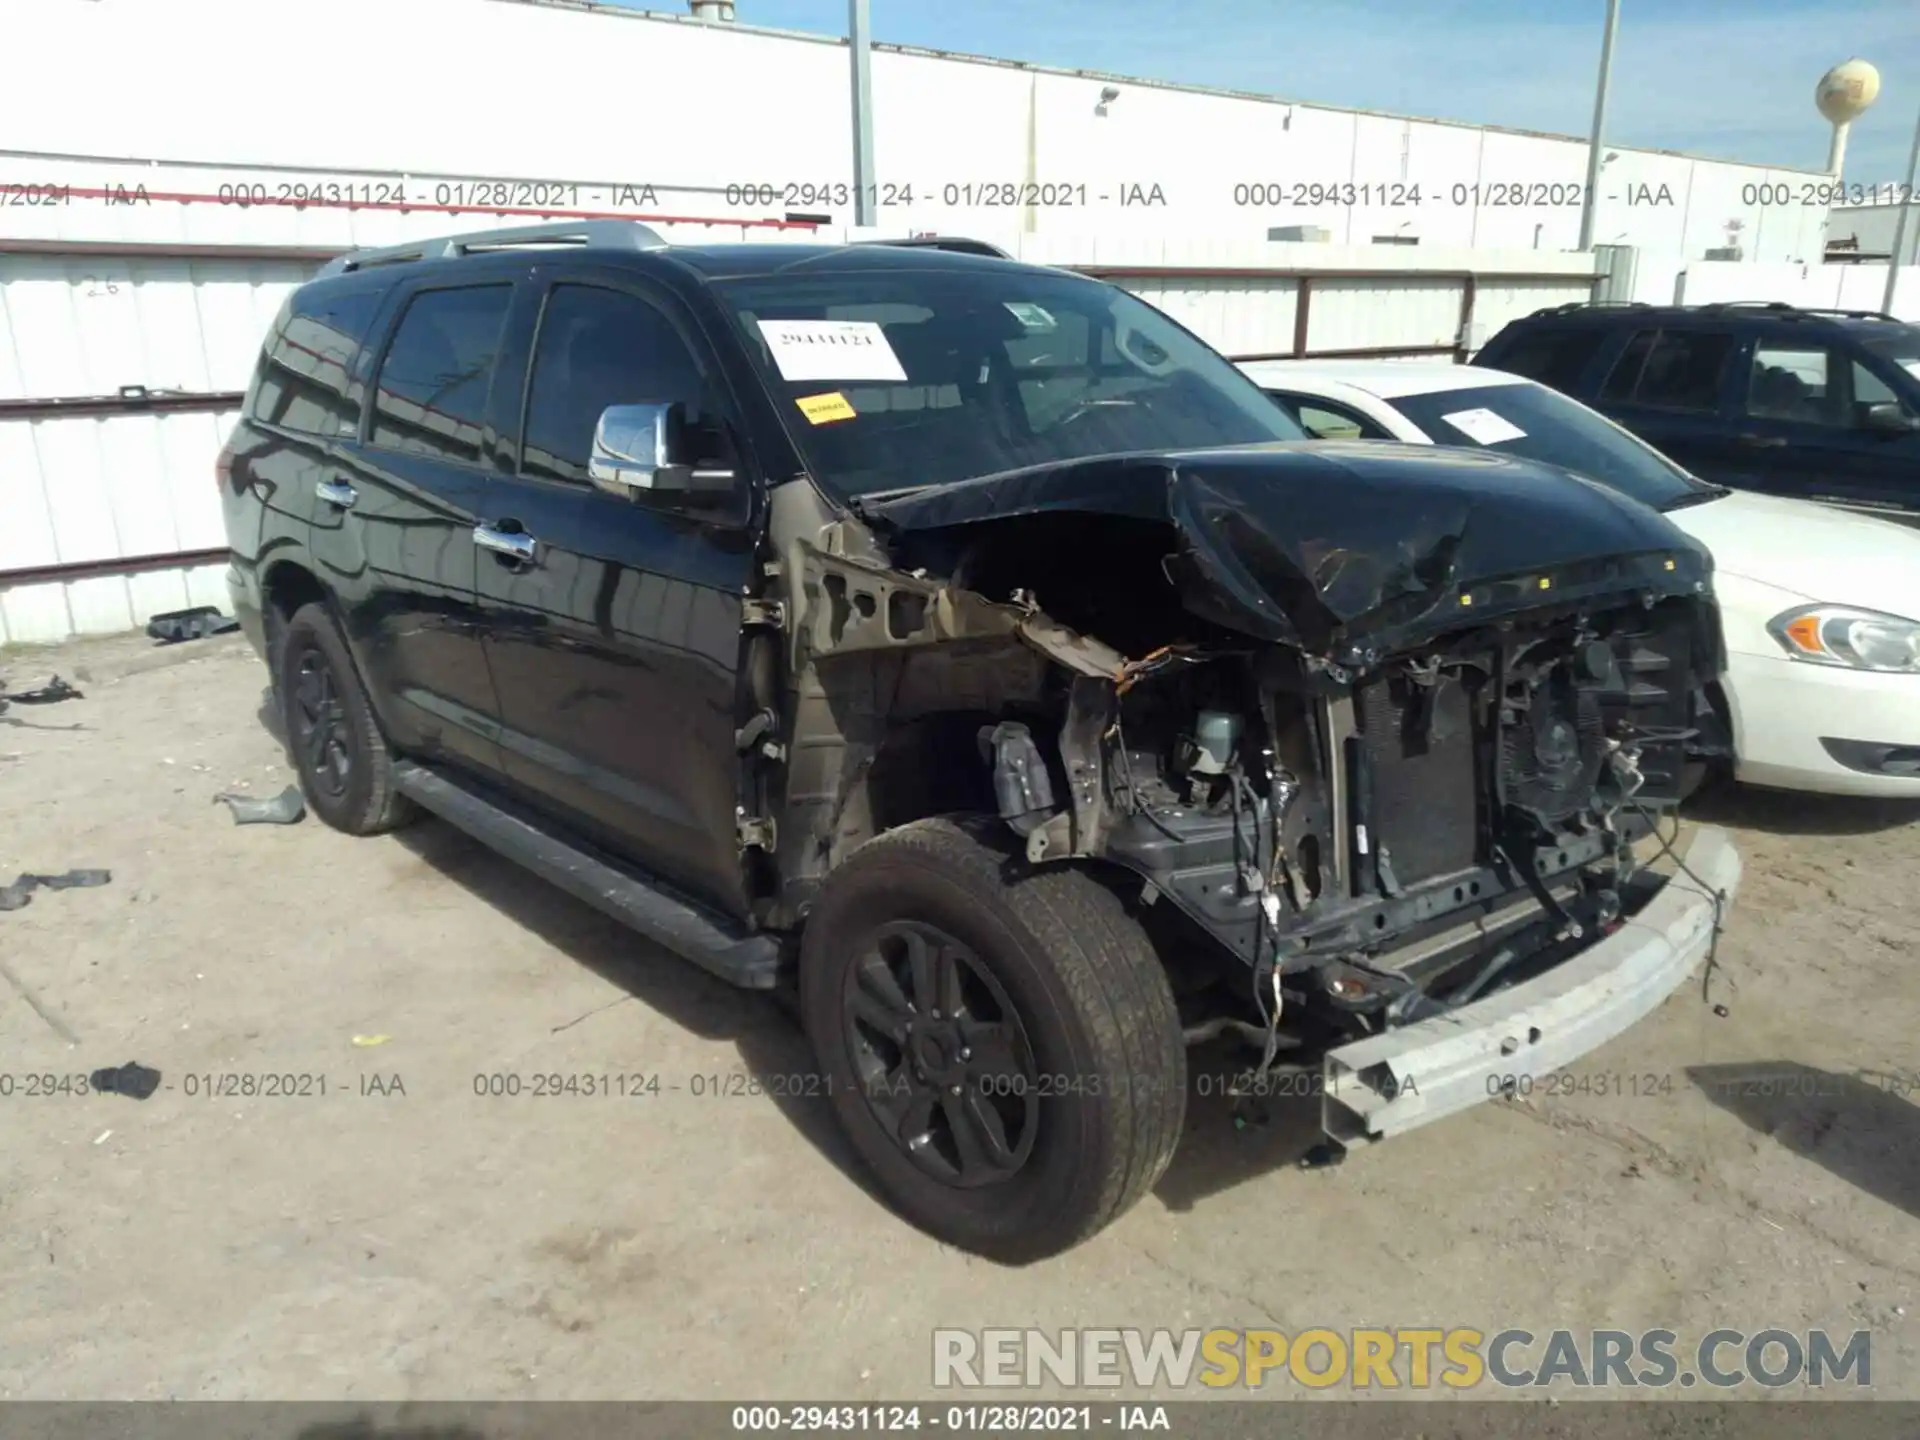 1 Photograph of a damaged car 5TDBY5G14KS168866 TOYOTA SEQUOIA 2019